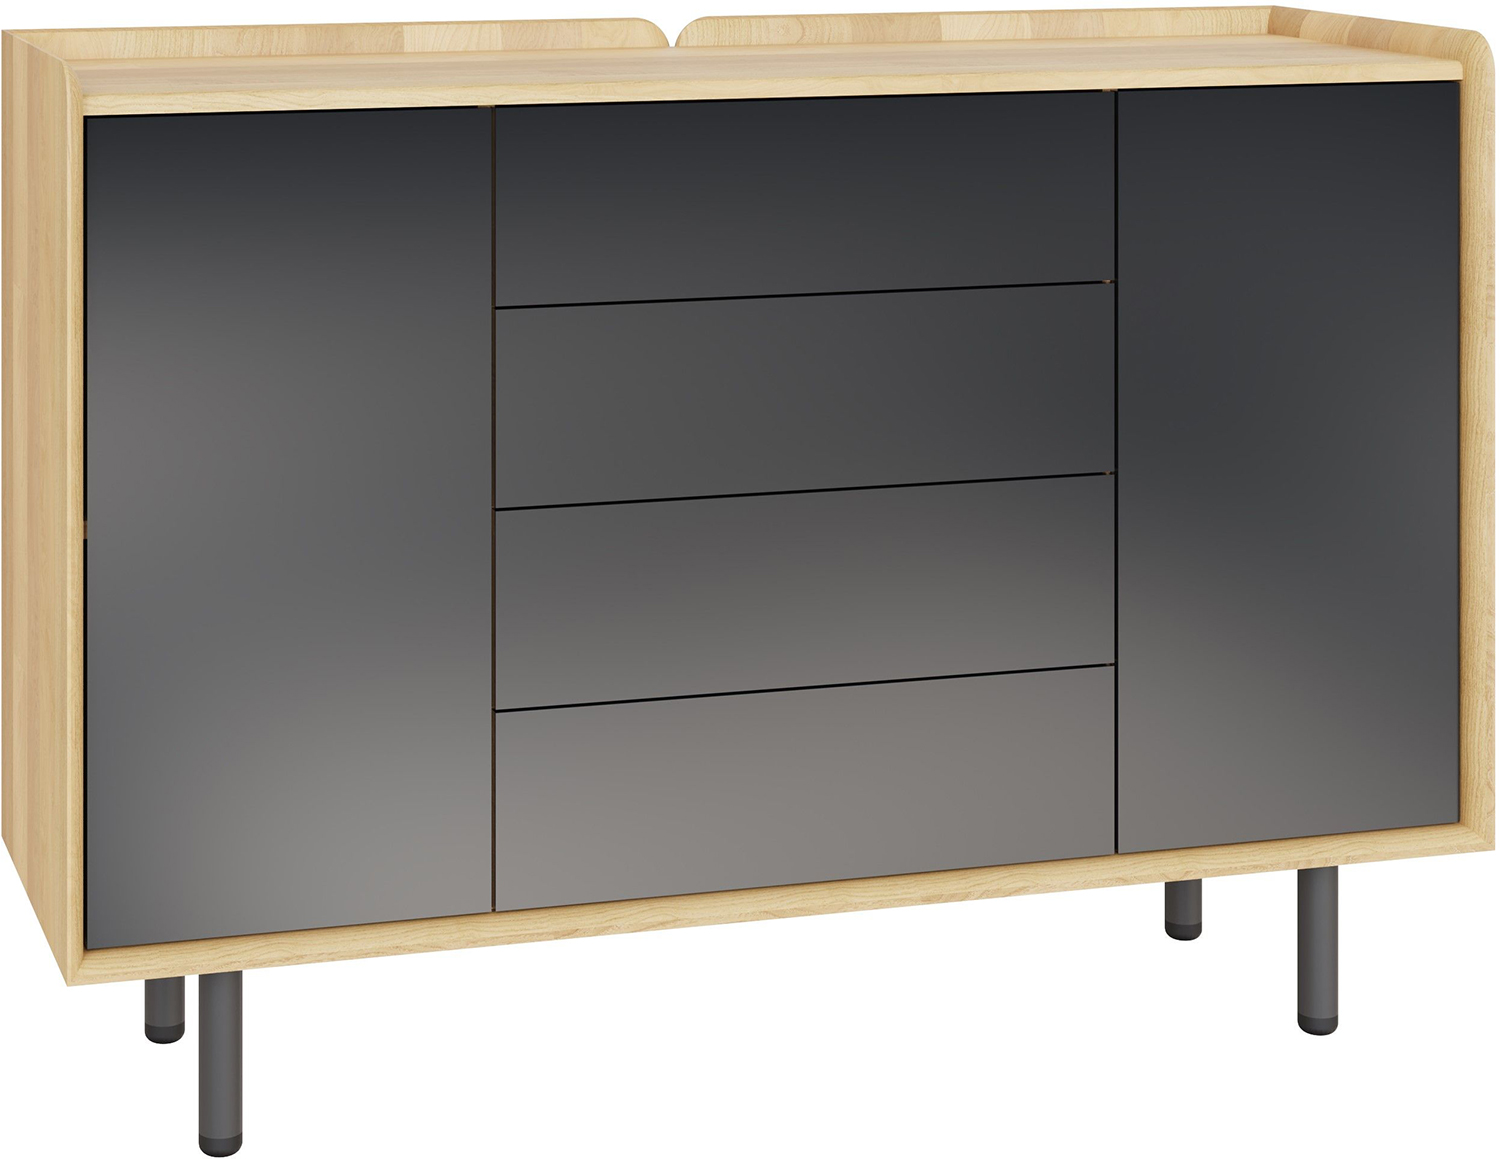 Bell & Stocchero Balto Large Sideboard - Anthracite